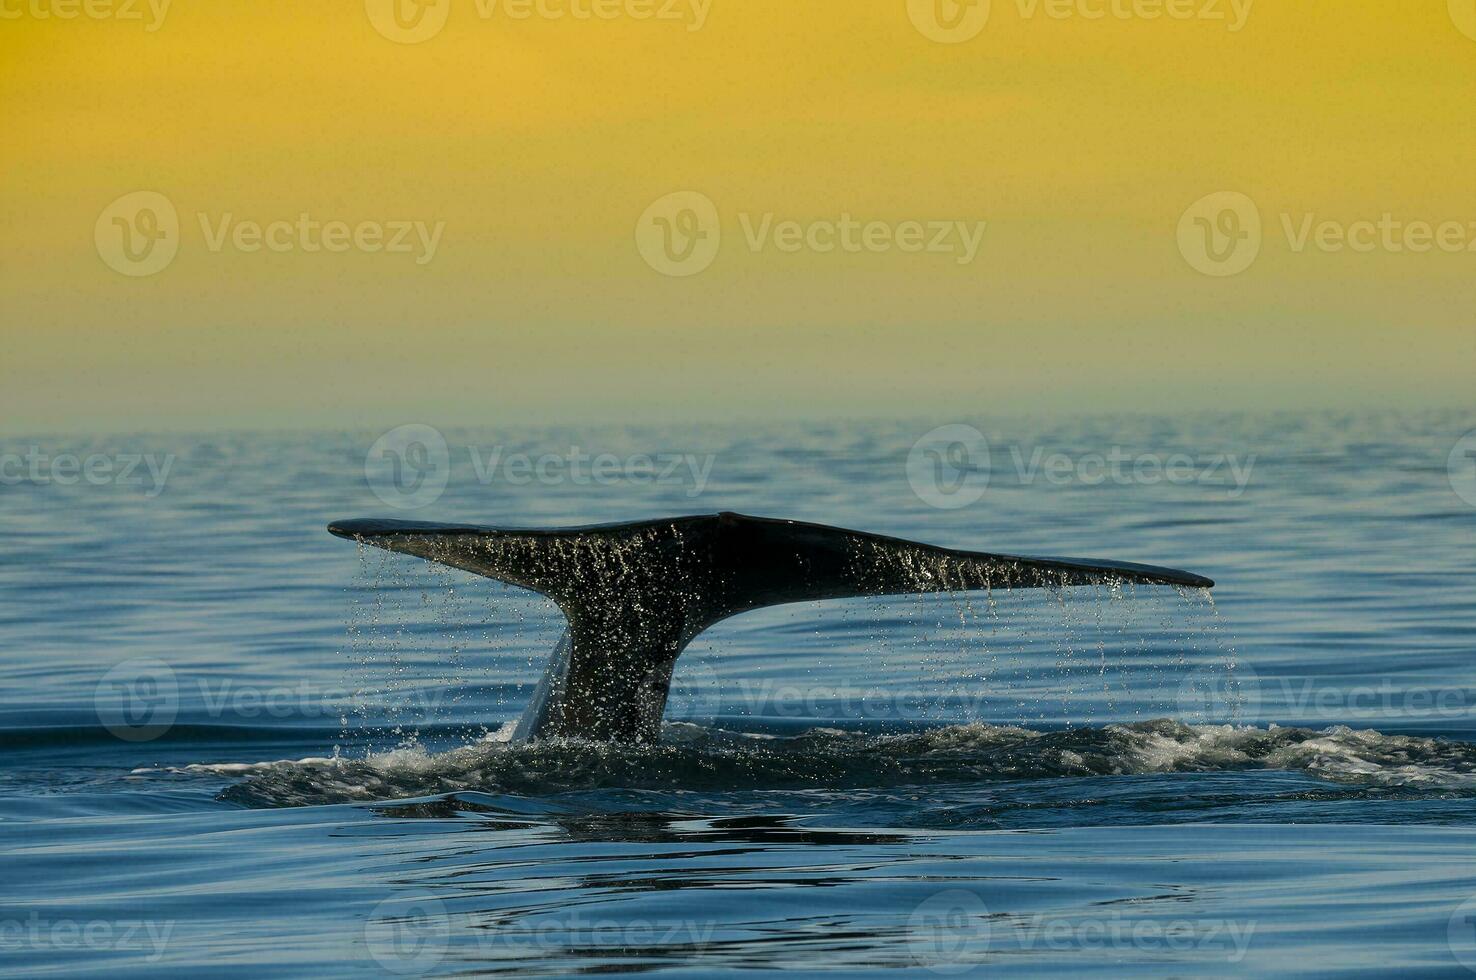 a whale in the water photo